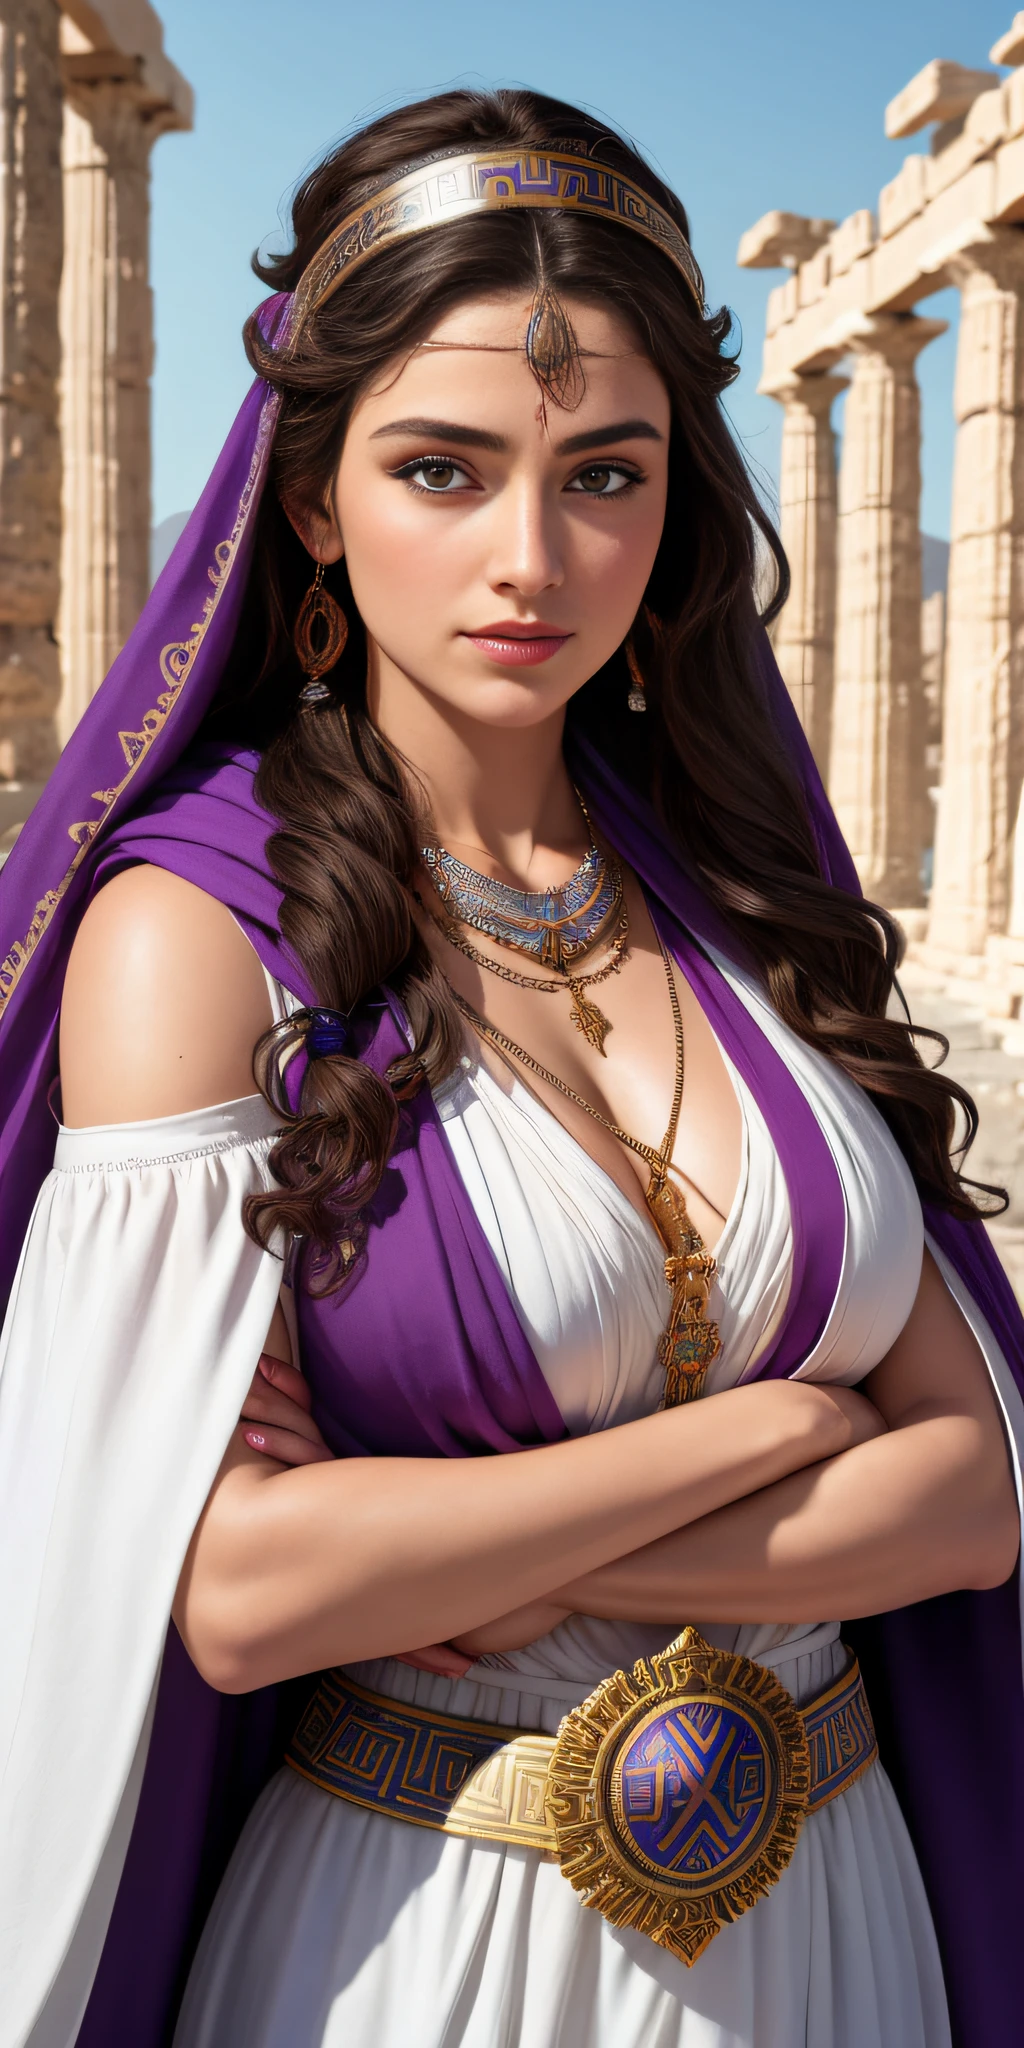 "((high quality image)), perfectly detailed and photorealistic with 8k resolution, fottorealistic, hyperrealistic, intricate details, depicting a beautiful priestess Delphi (Pythian), curly black hair, fleshy lips. She wears a white priestly robe and around her shoulders a purple scarf, and necklaces of protection against evil and a bandana on her forehead. And behind it is a giant statue of Zeus and Greek pillars.